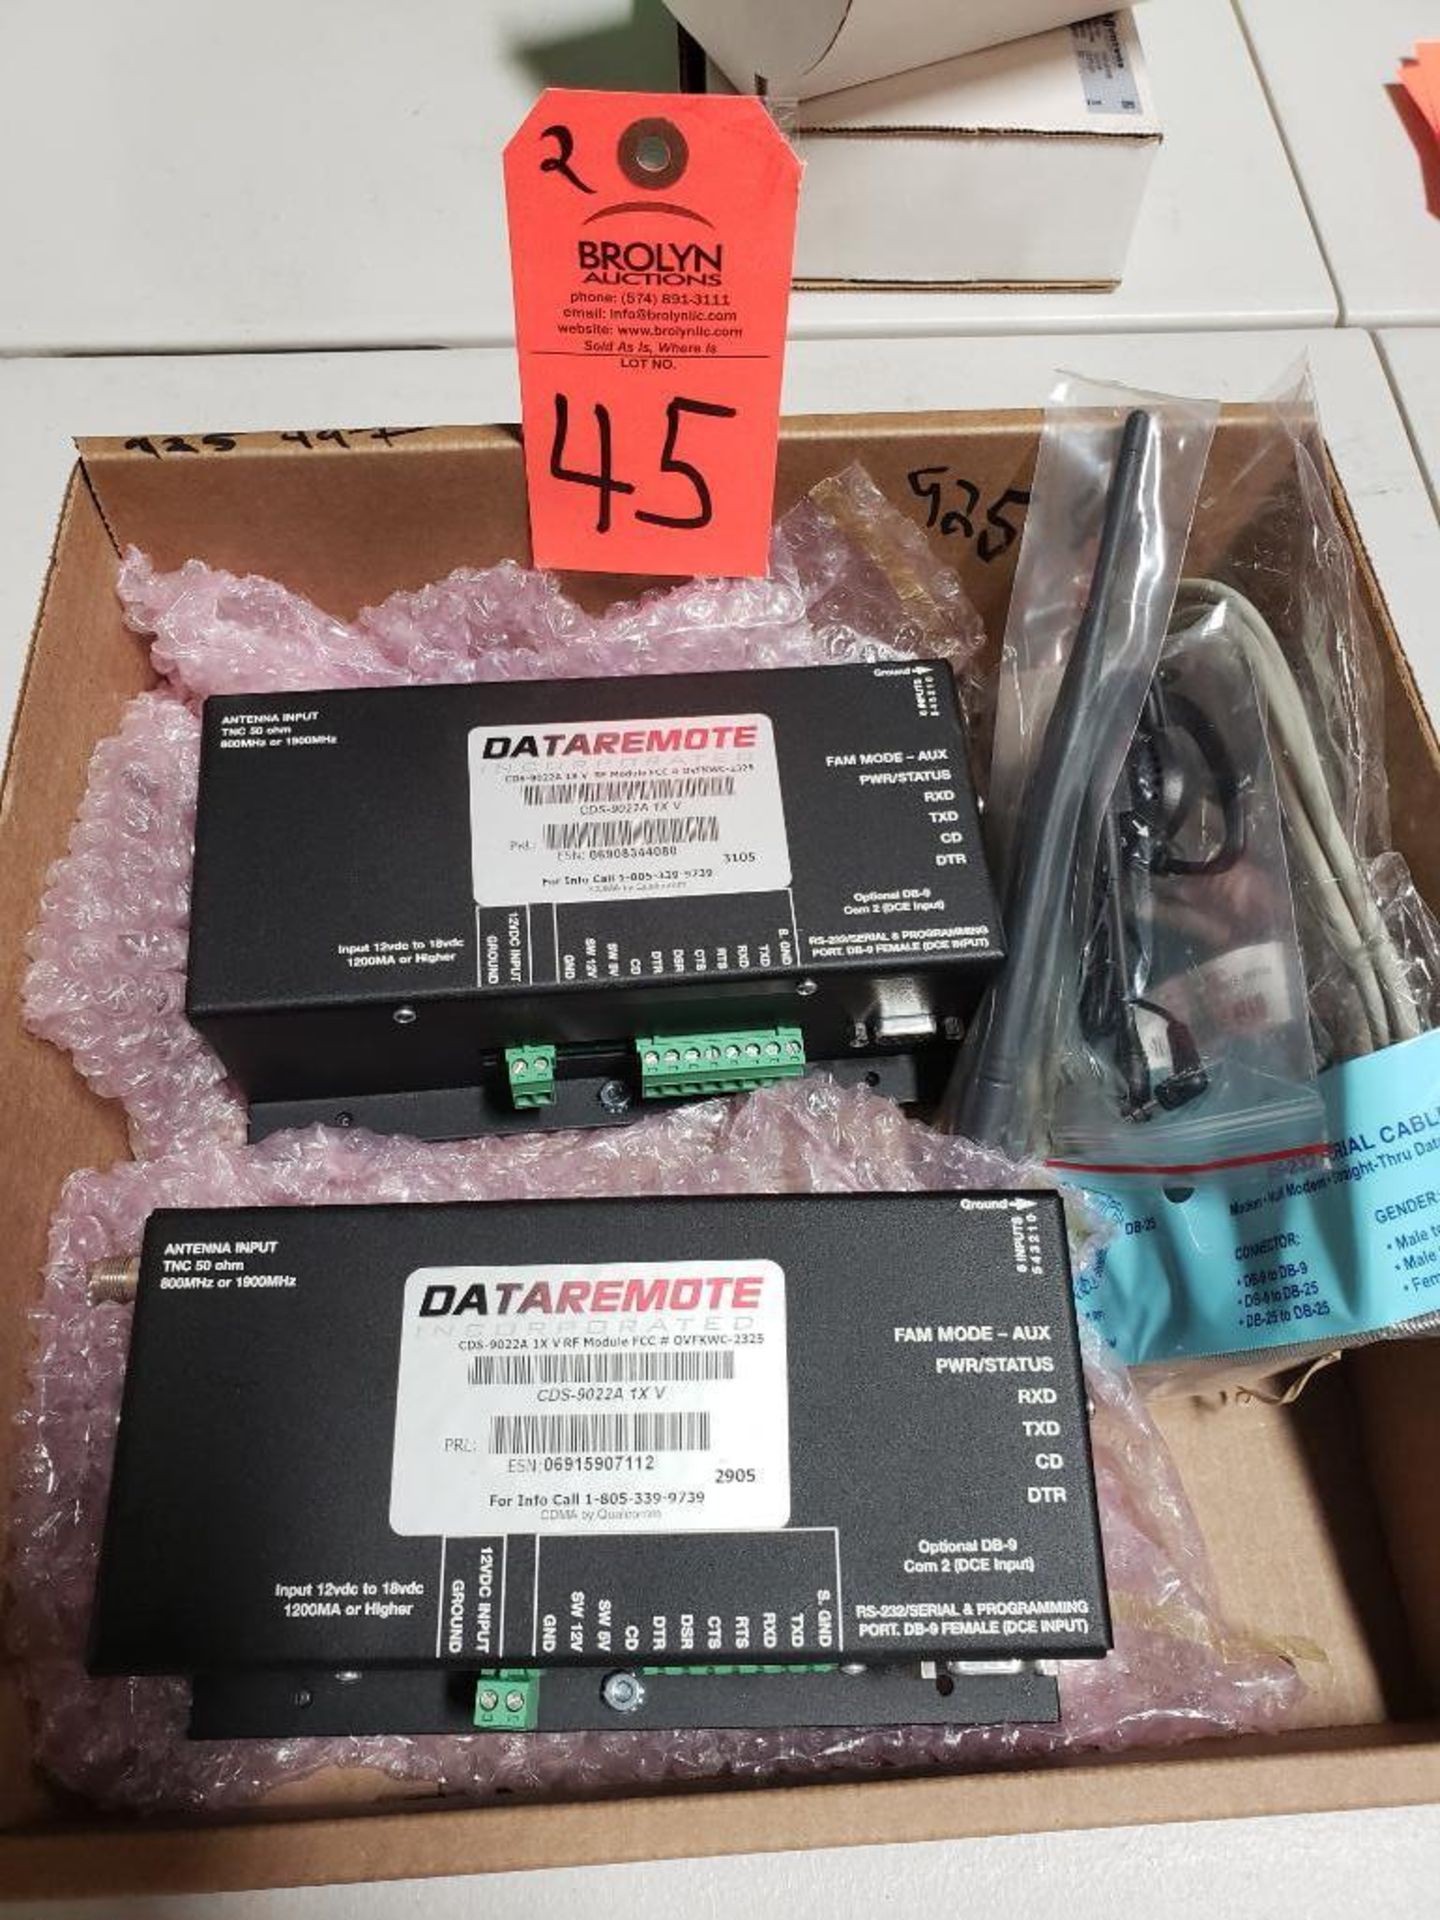 Qty 2 - Dataremote model CDS-9022-1X-V. New as pictured.